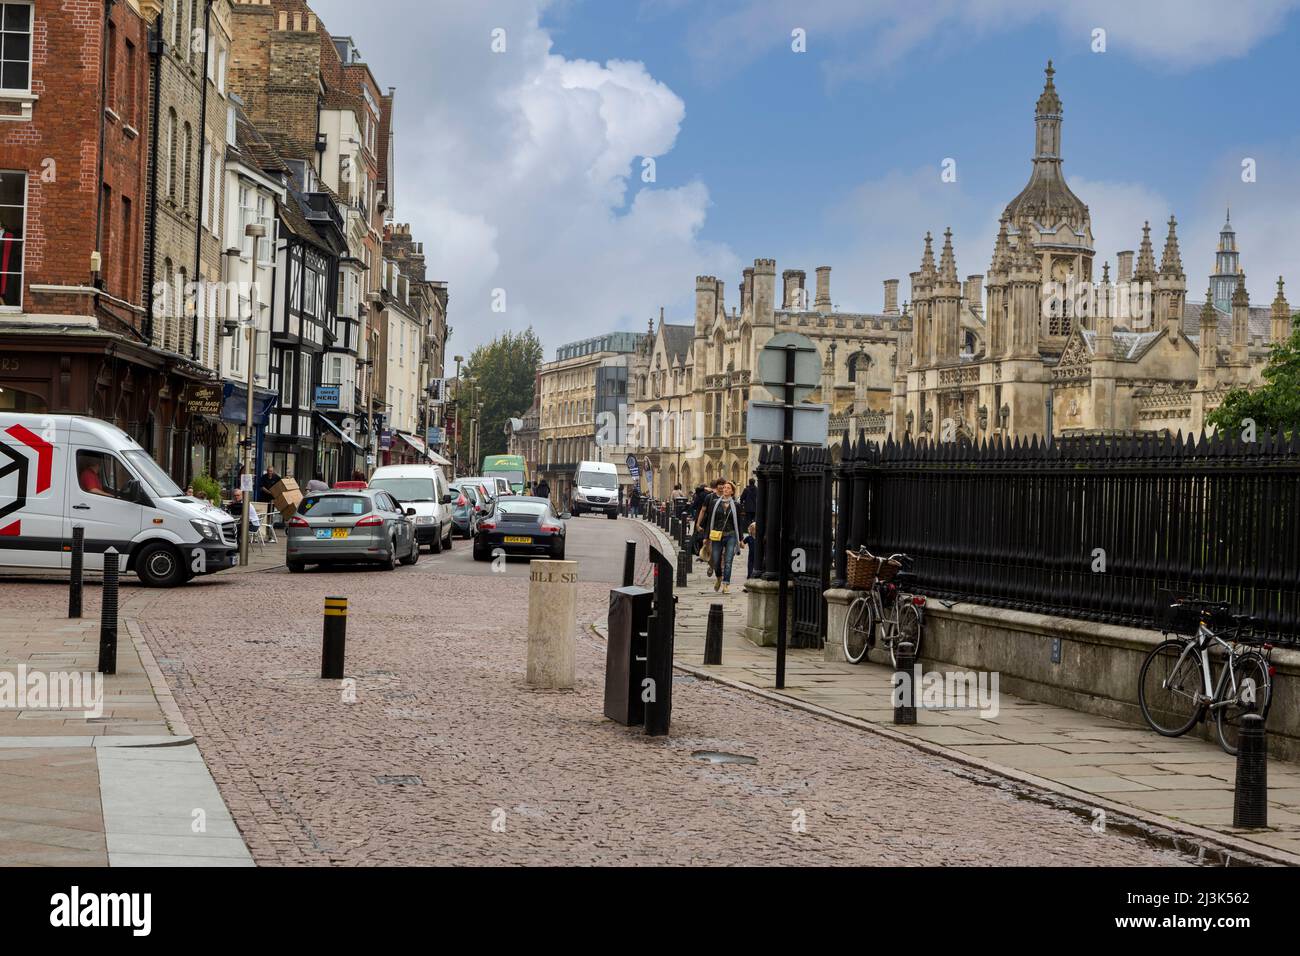 UK, England, Cambridge.  King's Parade, King's College on Right. Stock Photo